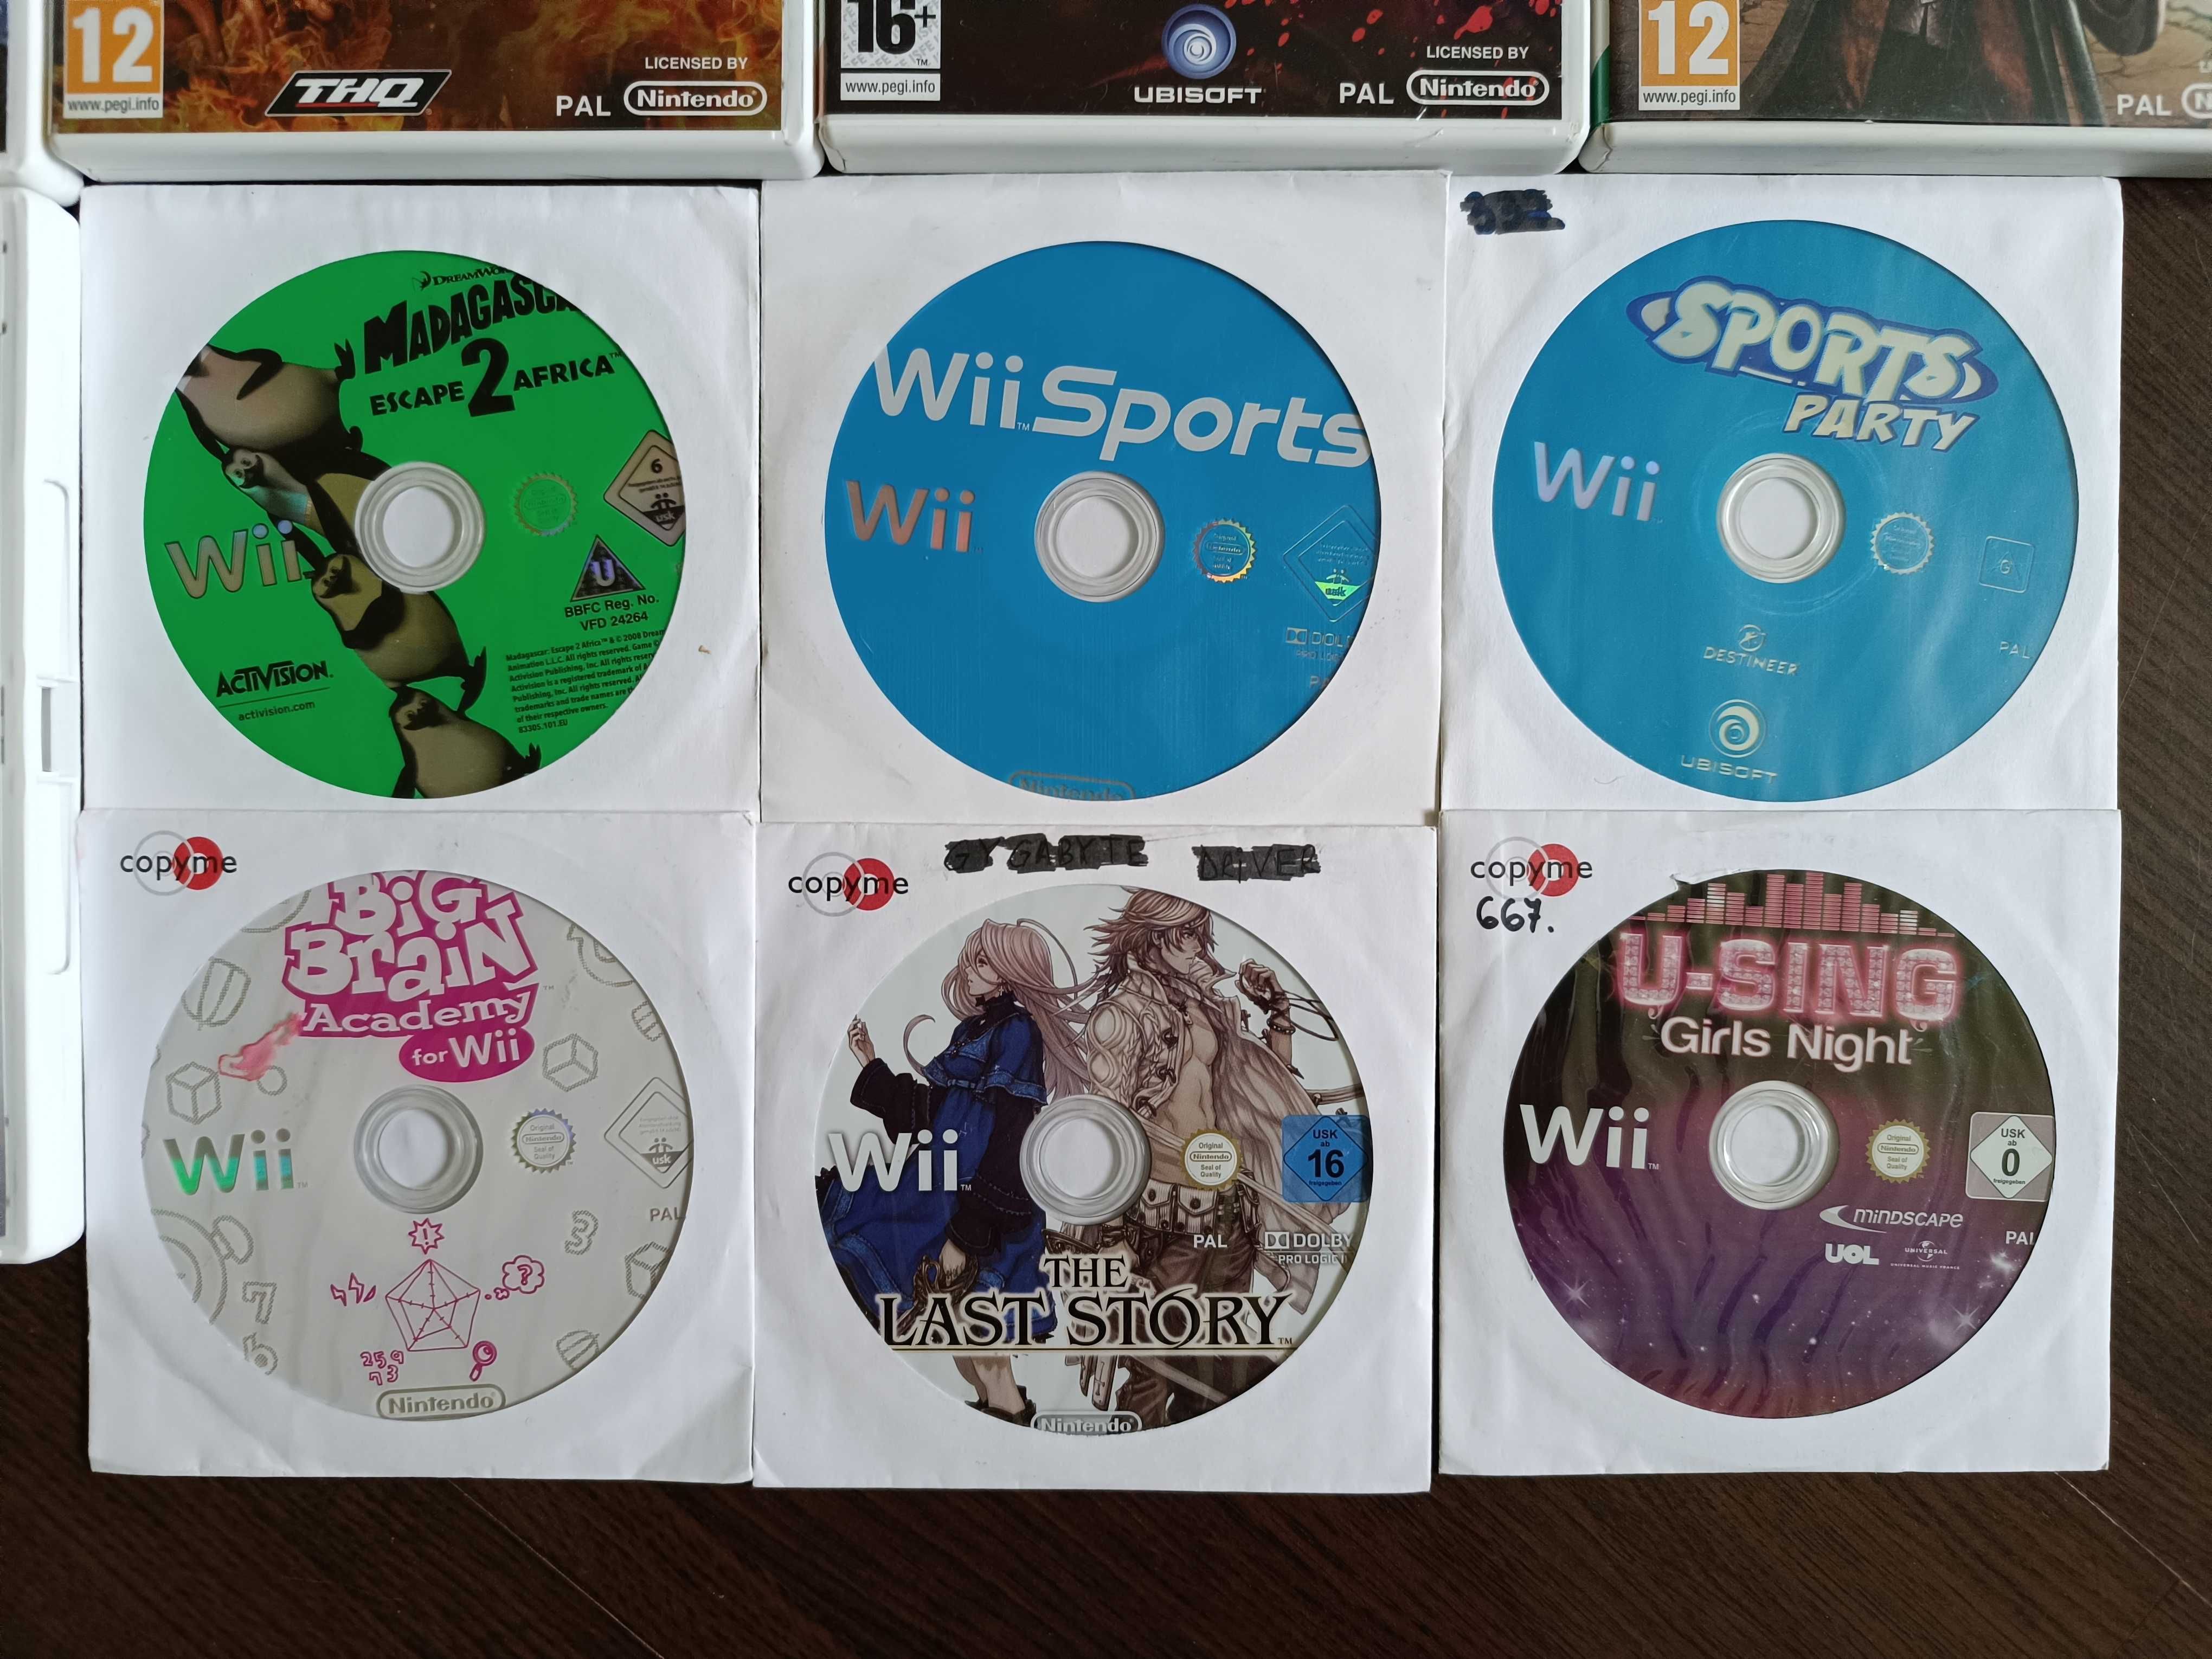 Wii Fit Plus CSI Fifa TNA PES Red Steel Dr Who Abba Guitar Hero Sudoku